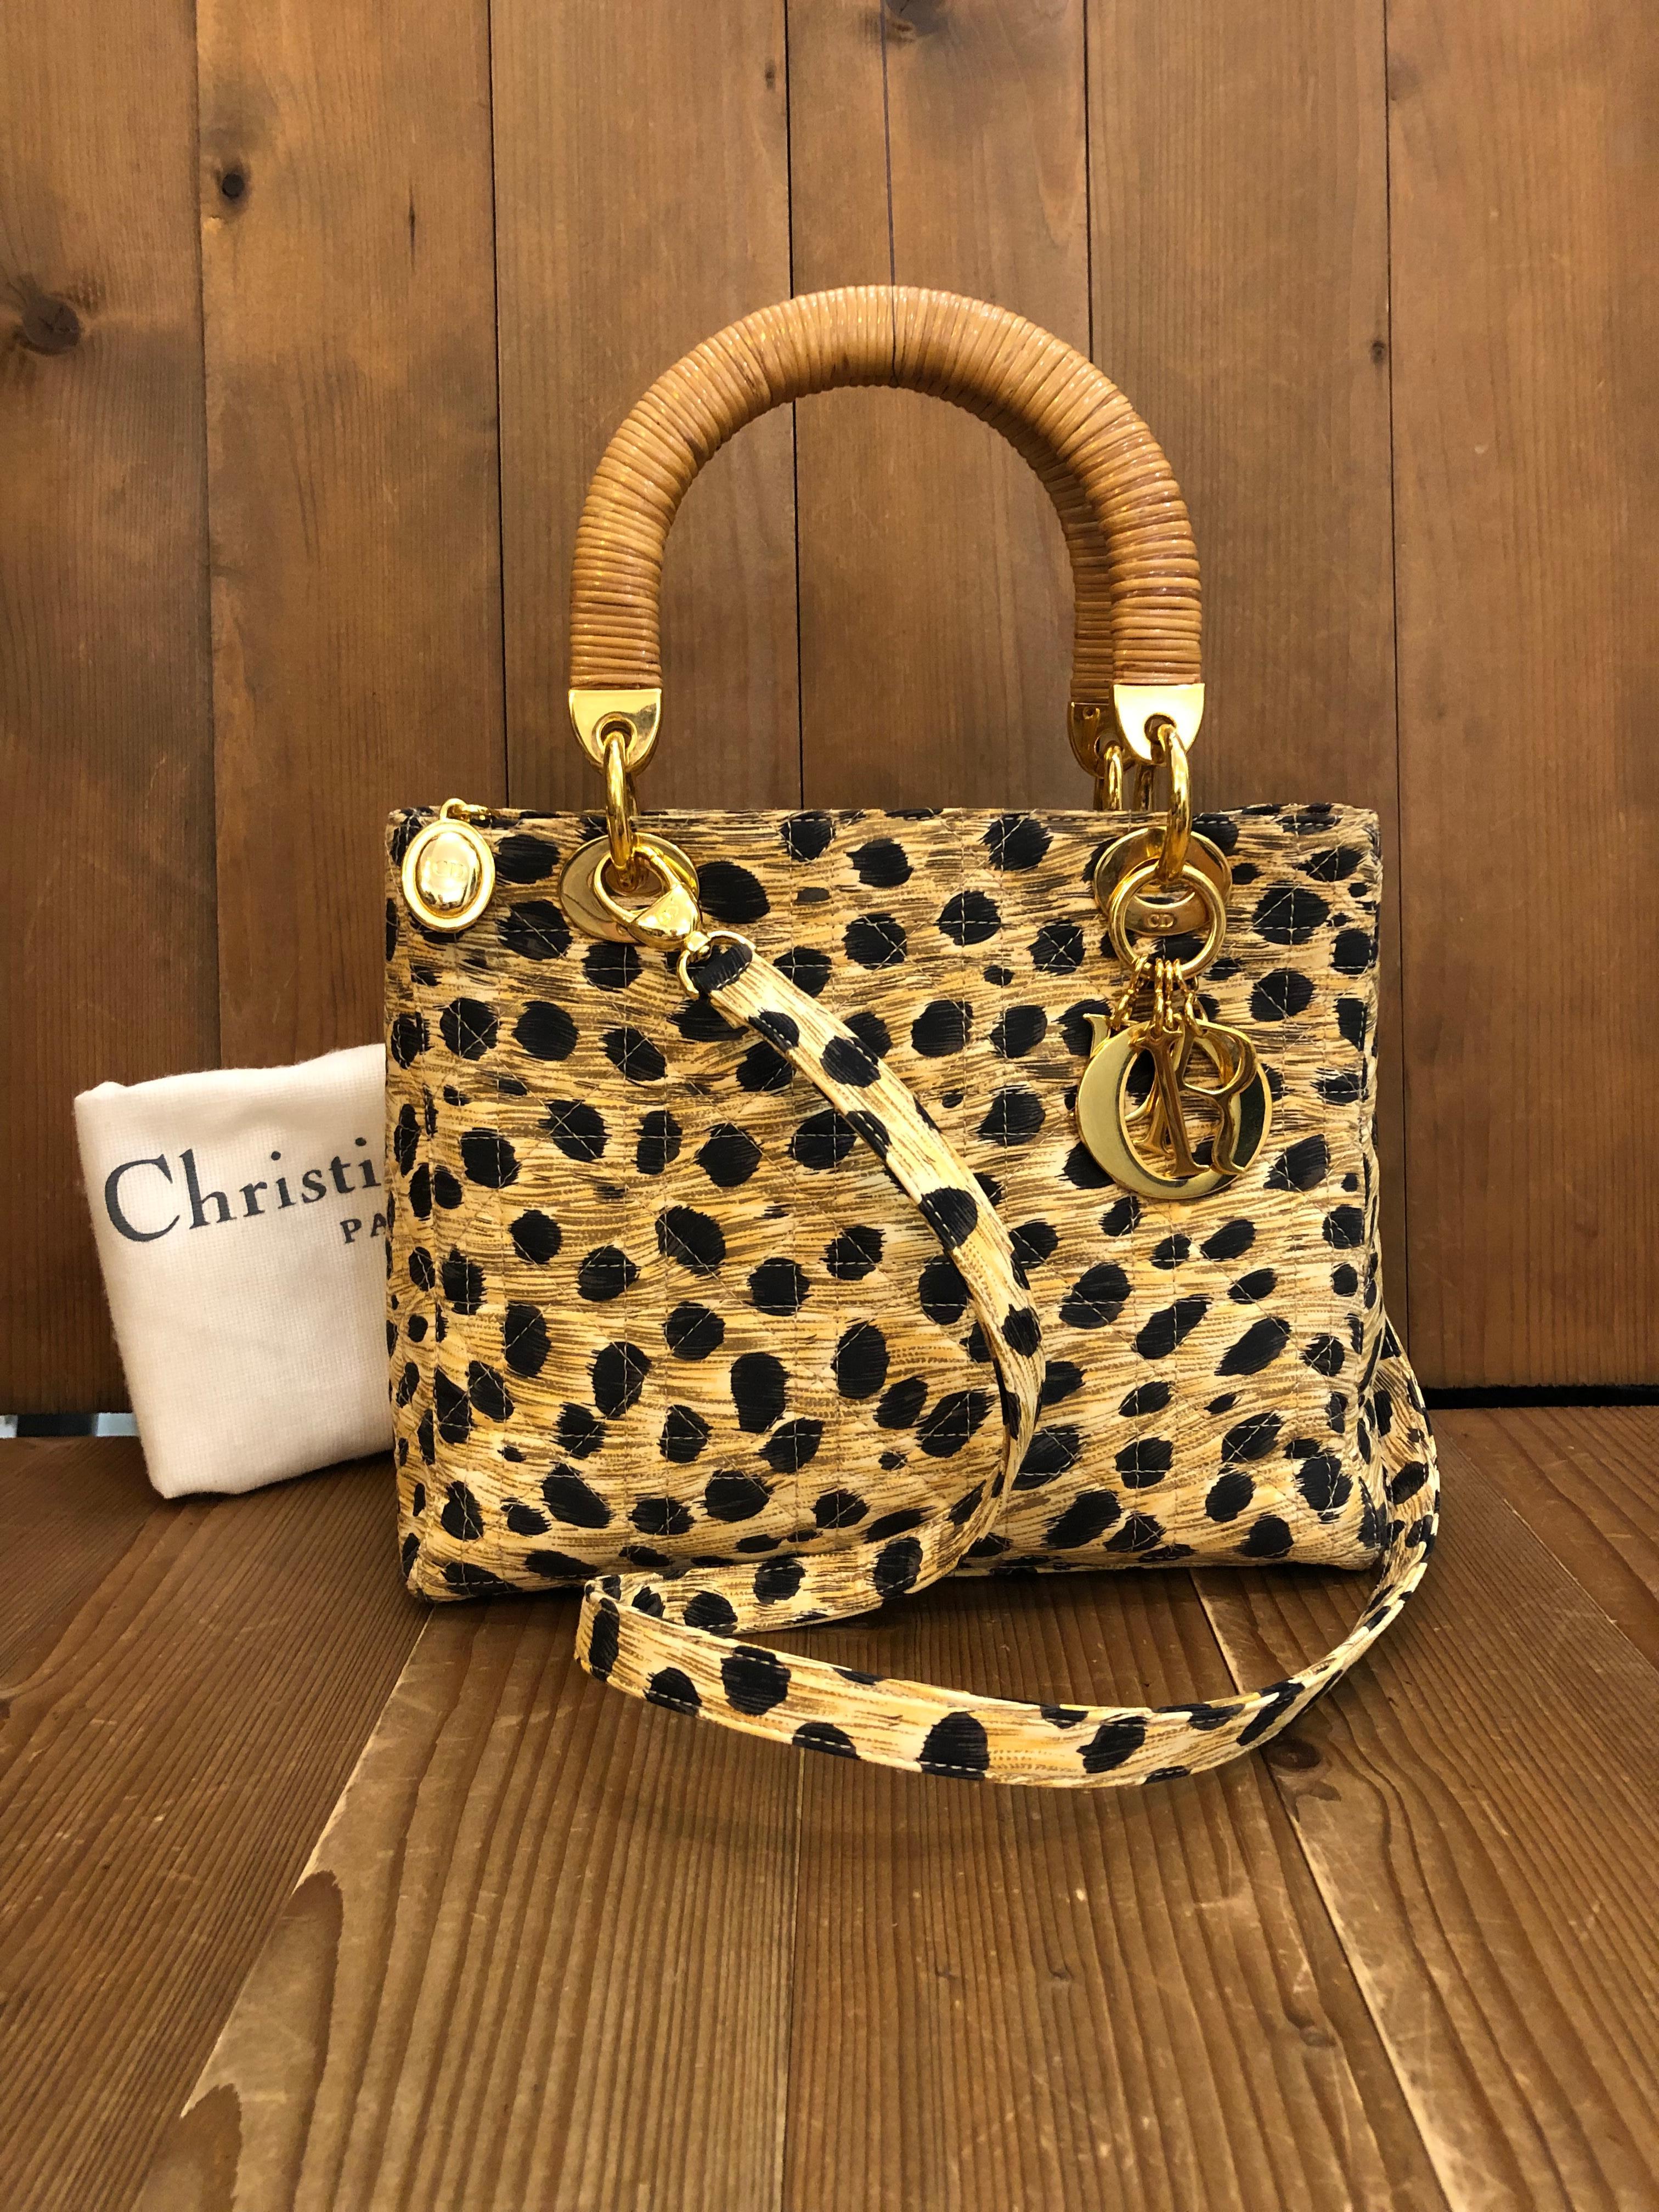 This vintage Lady Dior is crafted of black and yellow leopard printed nylon in Dior signature cannage pattern with gold toned hardware featuring rattan handles. It can be carried as a handbag or shoulder bag with the detachable shoulder strap that